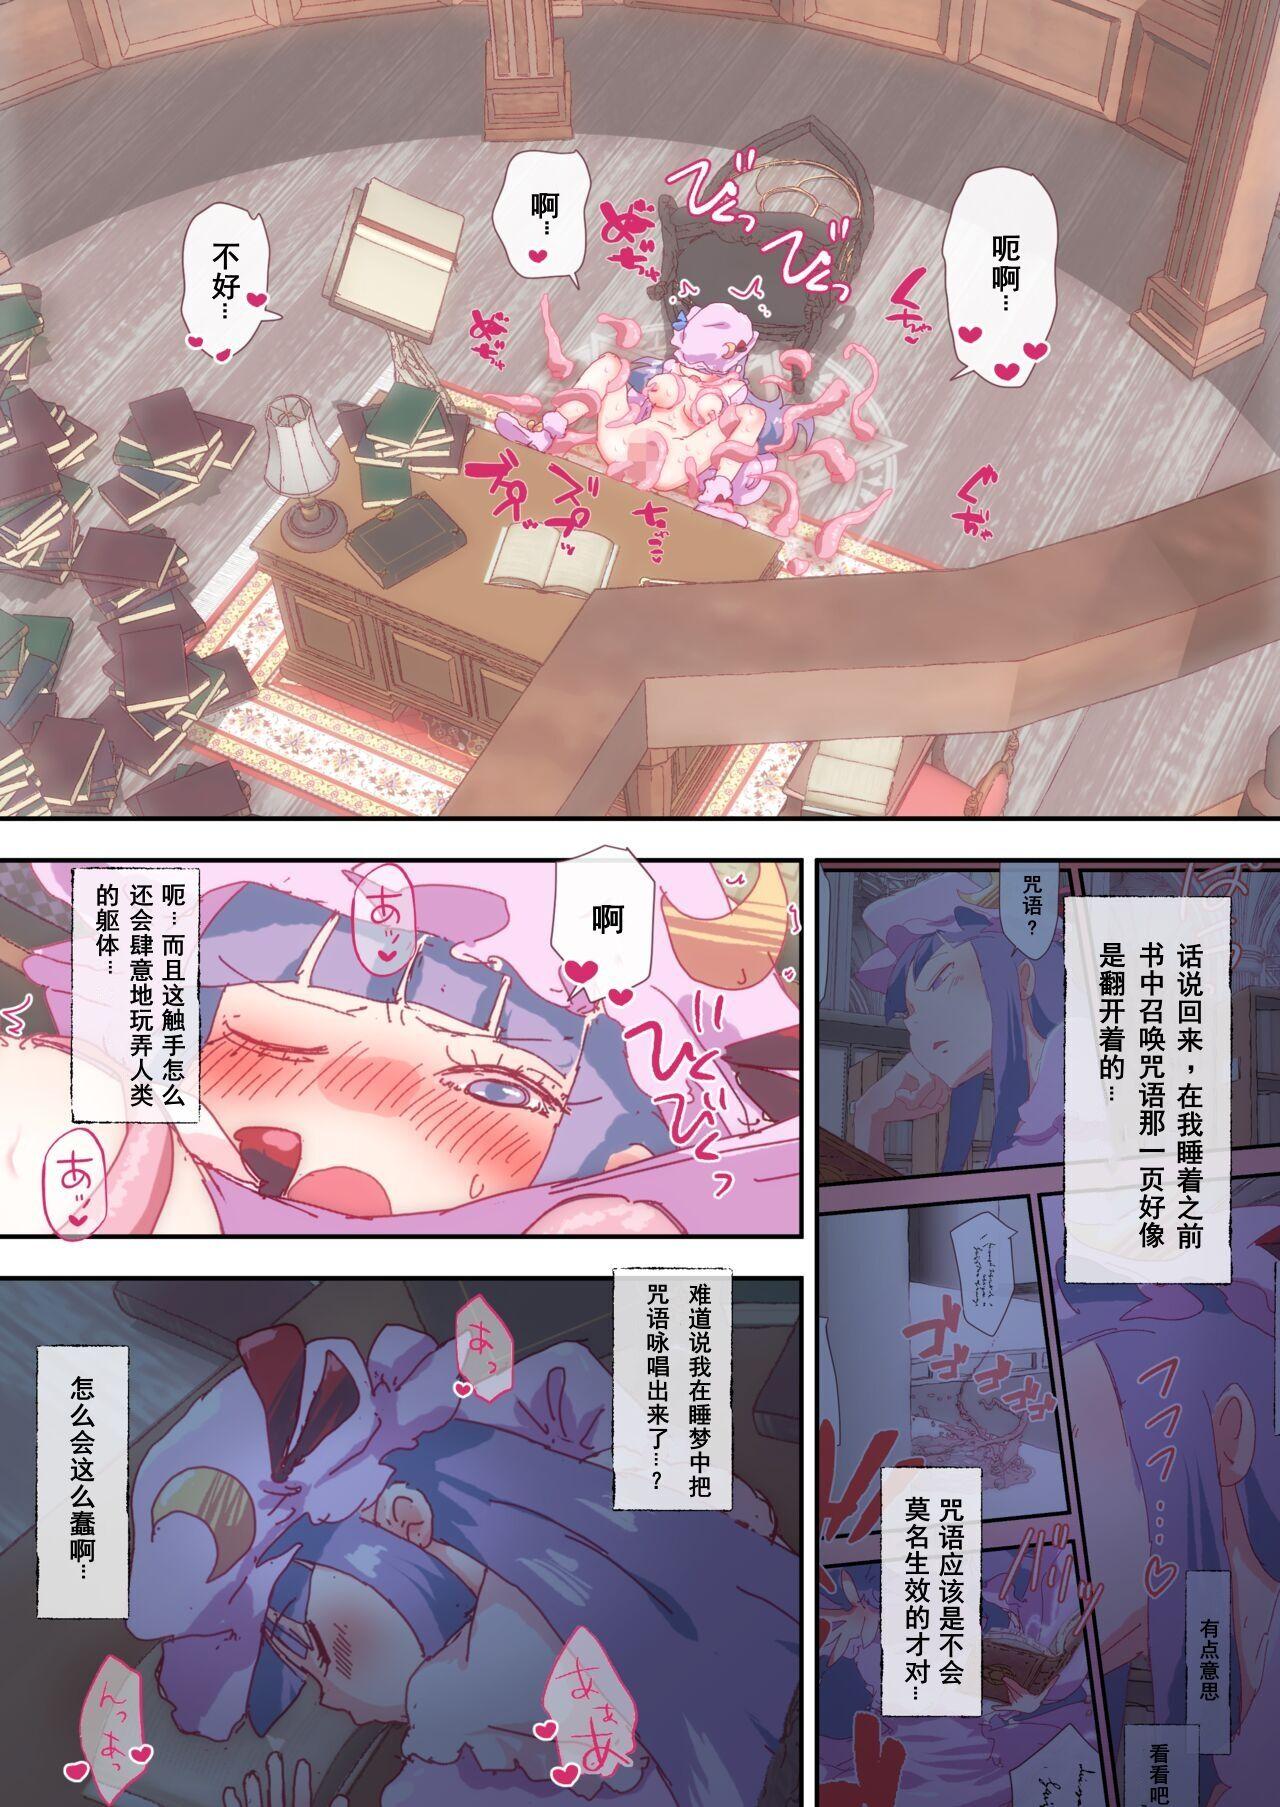 Punishment [Non] inshoku-te to patche-san, futatabi. (Touhou Project)(Chinese) - Touhou project Amateur Sex - Page 4